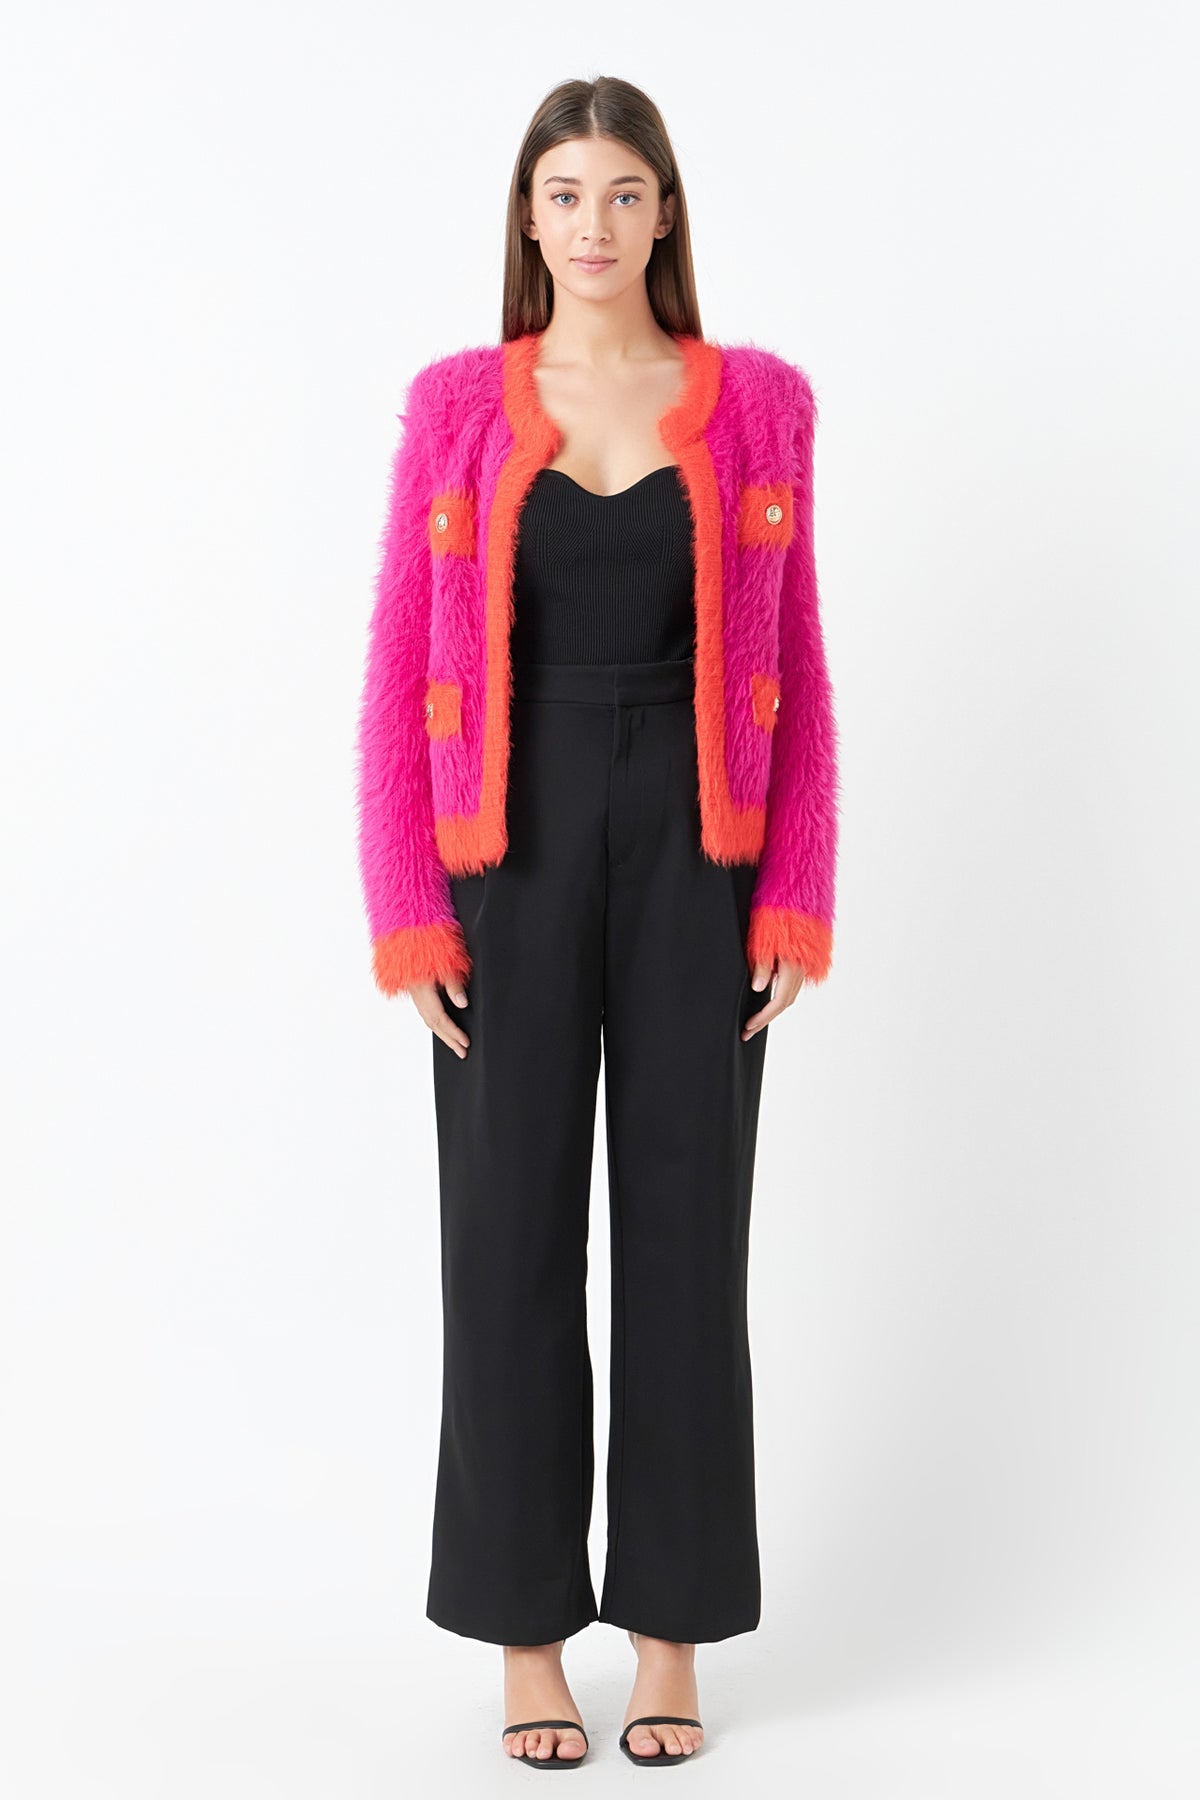 ENDLESS ROSE - Fuzzy Cardigan - CARDIGANS available at Objectrare